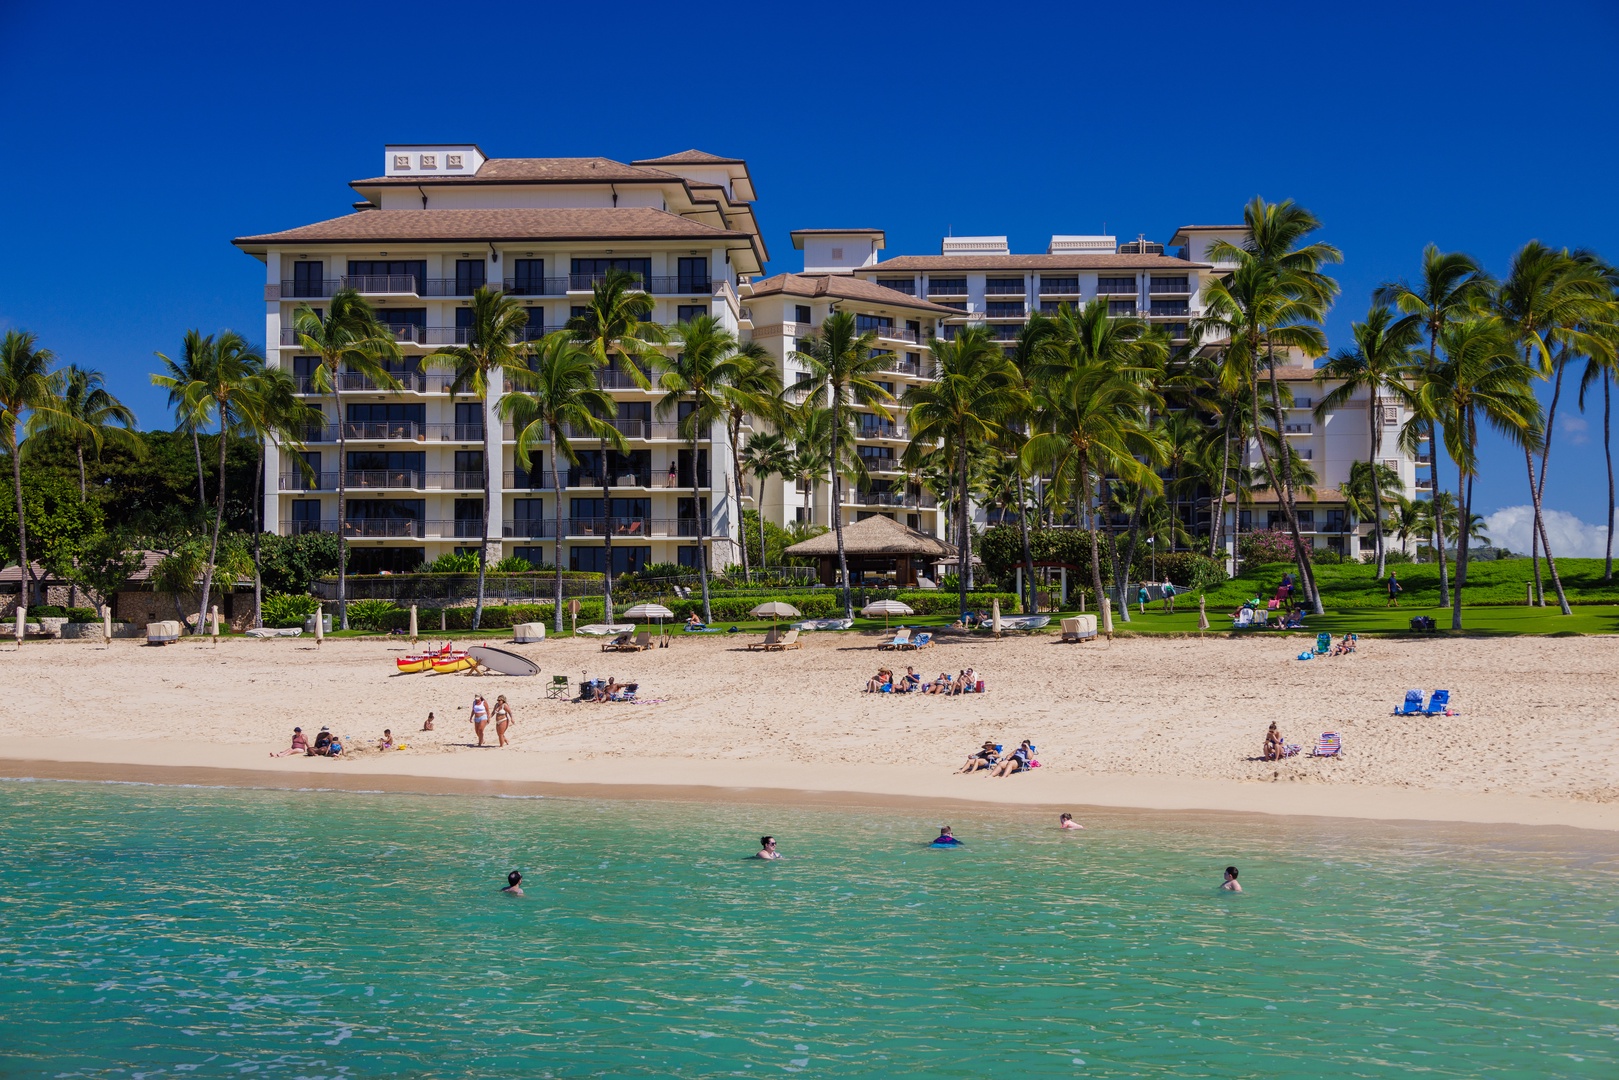 Kapolei Vacation Rentals, Ko Olina Kai Estate #20 - Ko Olina's private lagoons with soft sands and crystal blue water, perfect for afternoon swim or spectacular views.